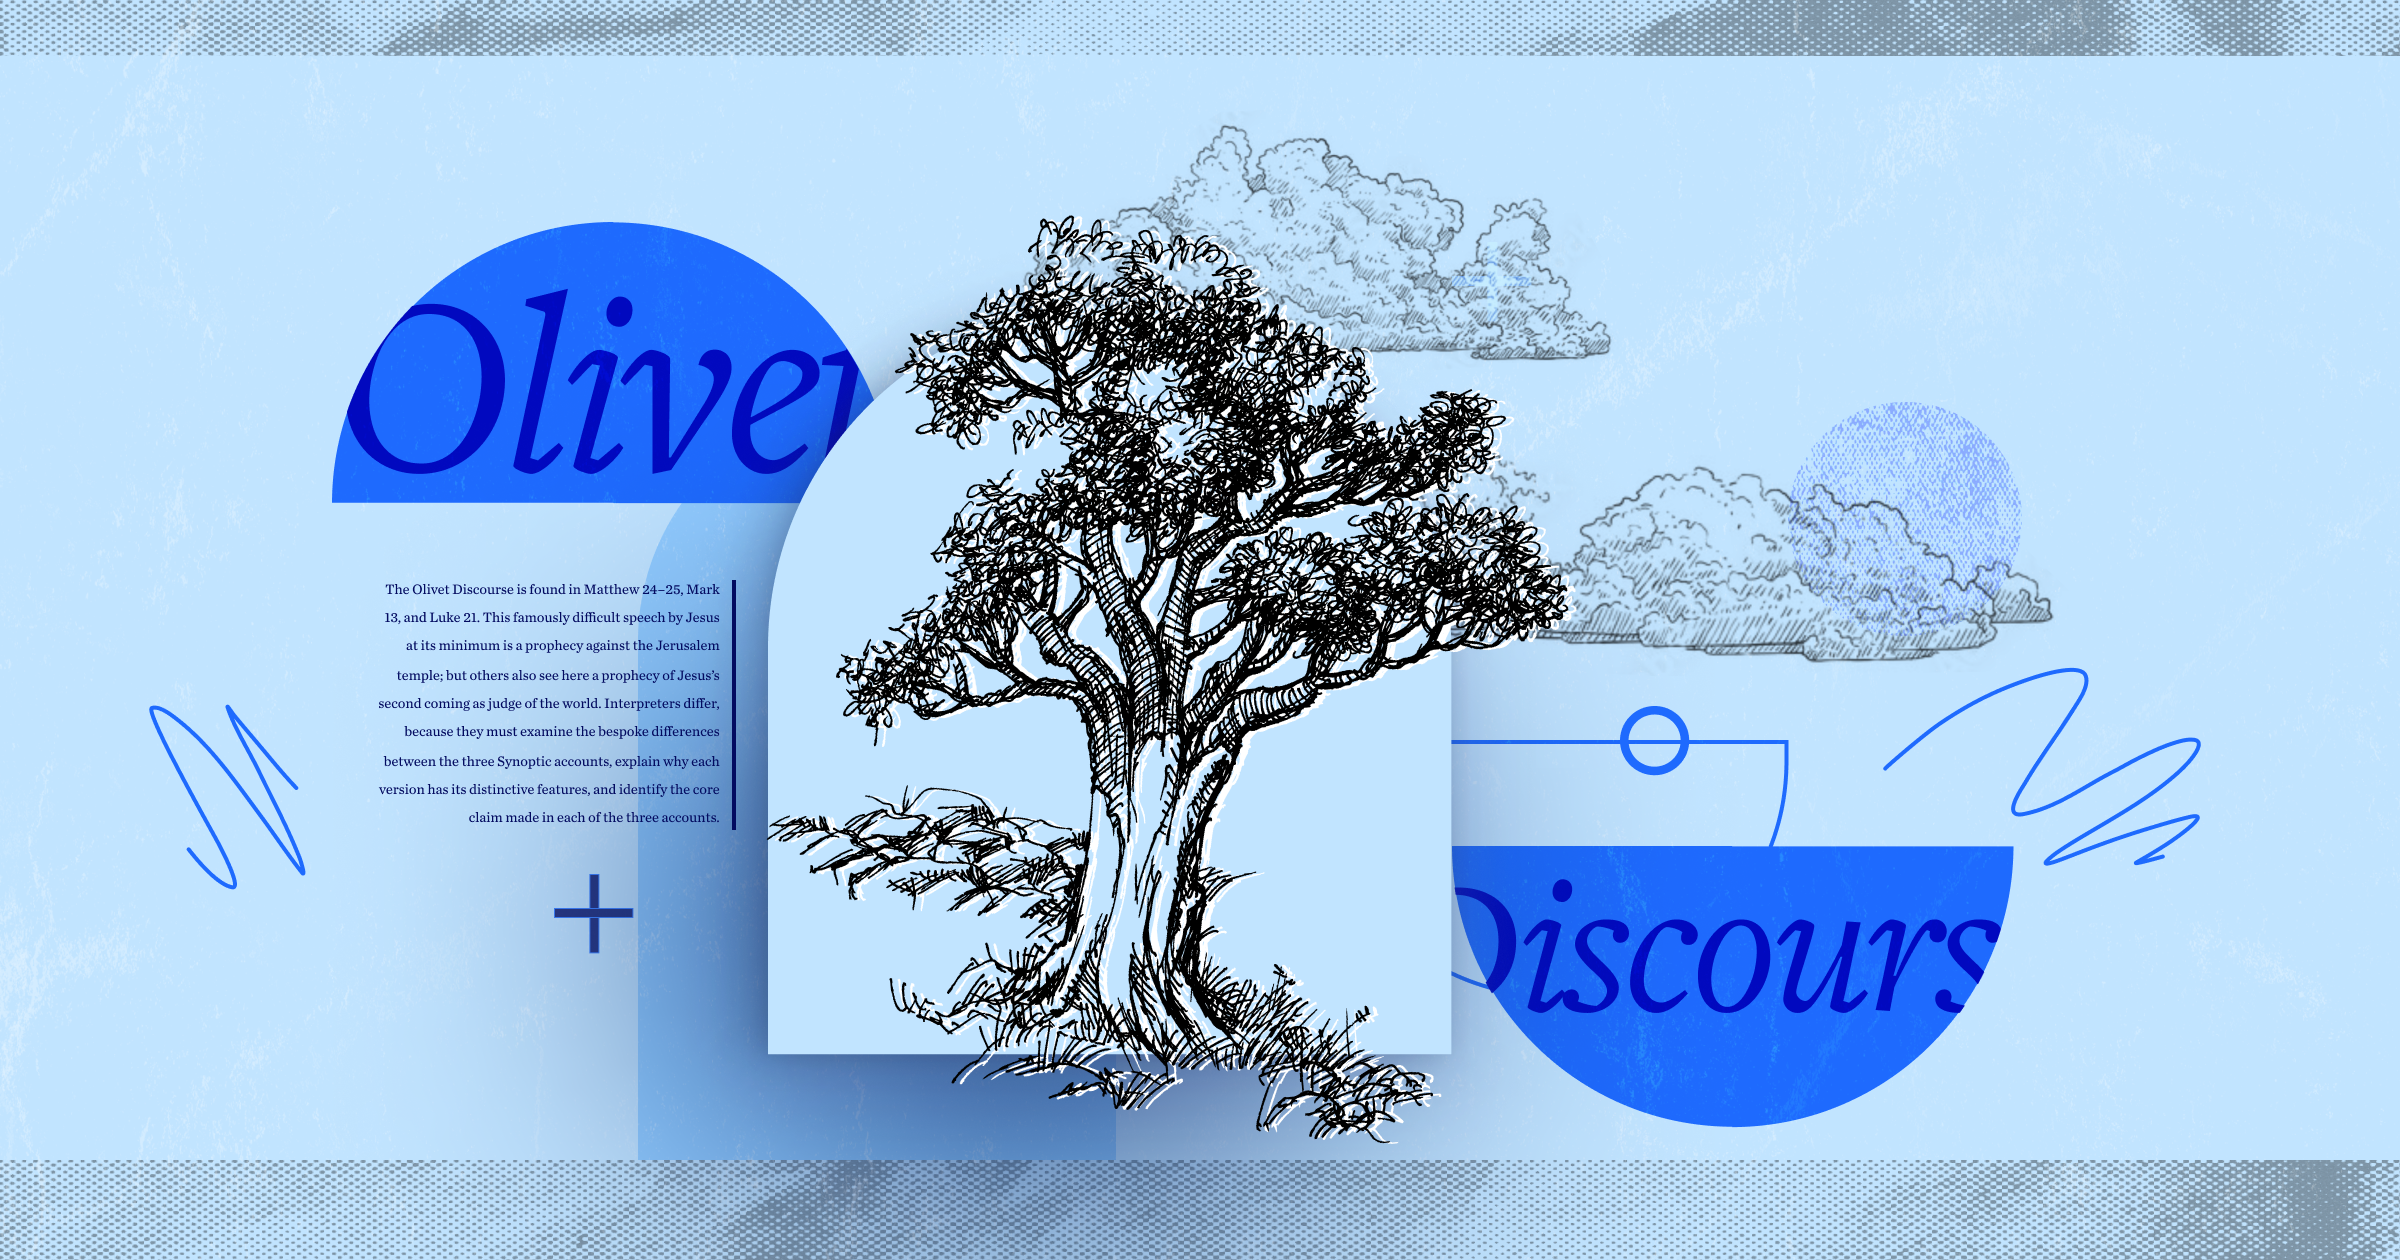 Image depicting the words Olivet Discourse on either side of a strong tree. An excerpt from an article is shown on the left side, representing the theological discussion of the Olivet Discourse.